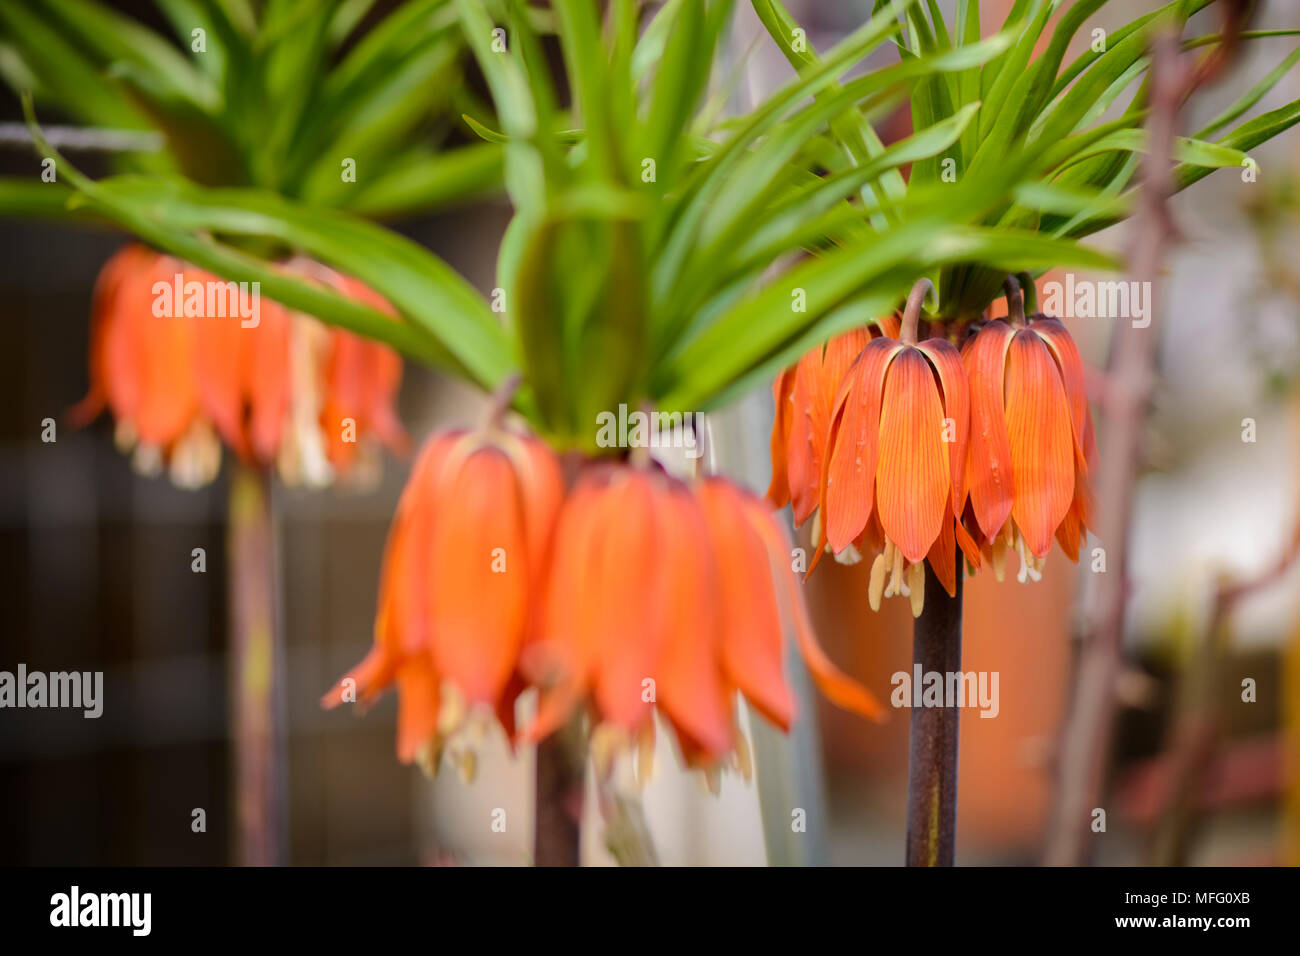 close up of a Fritillaria flowers , blurry background Stock Photo